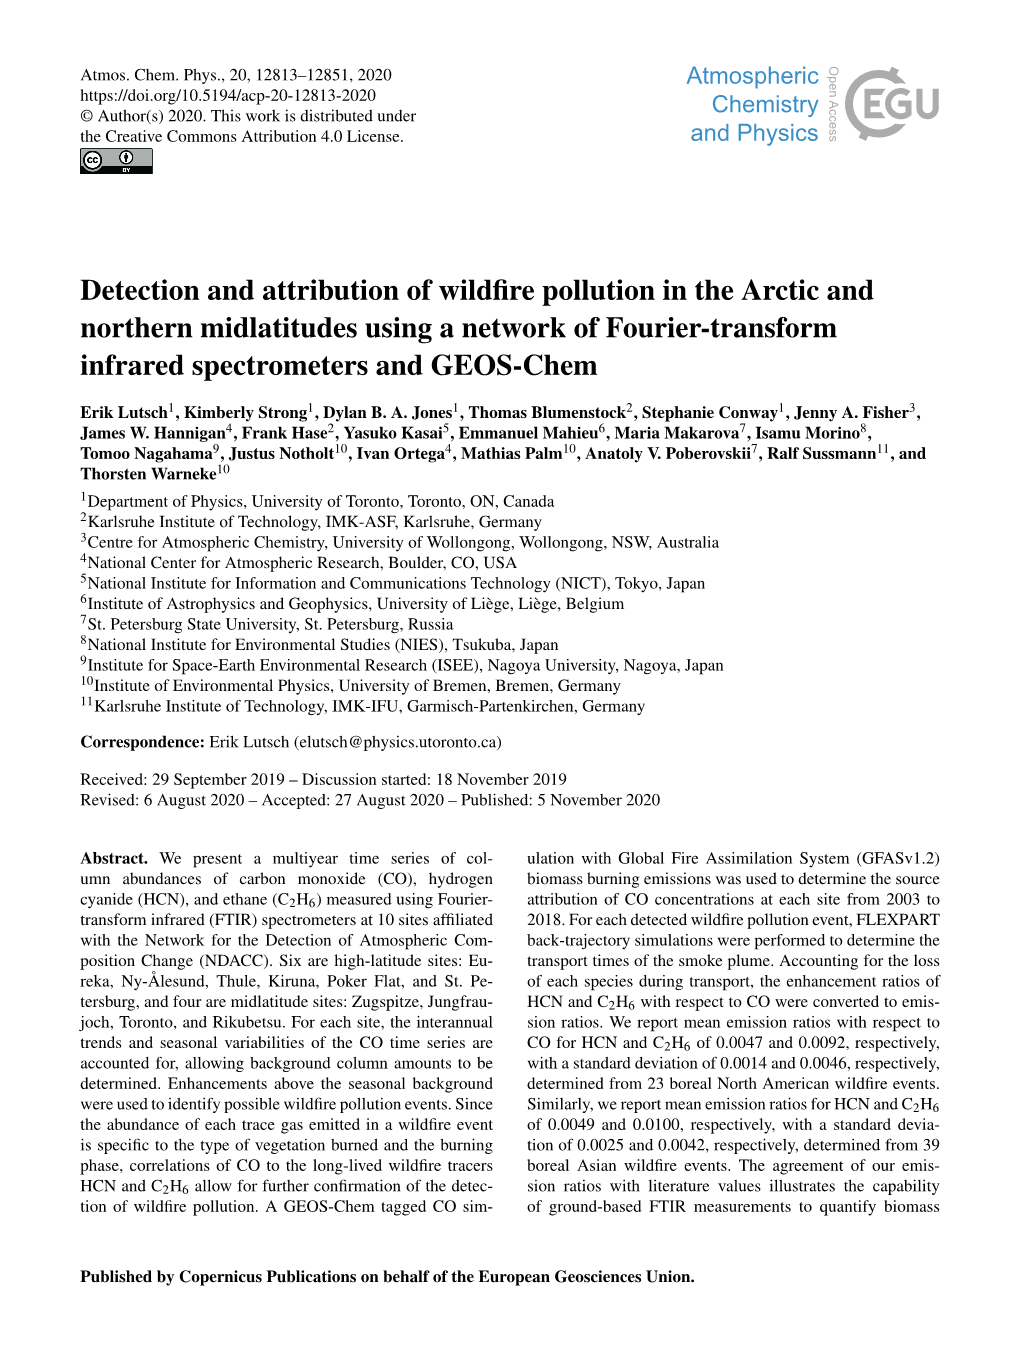 Detection and Attribution of Wildfire Pollution in the Arctic and Northern